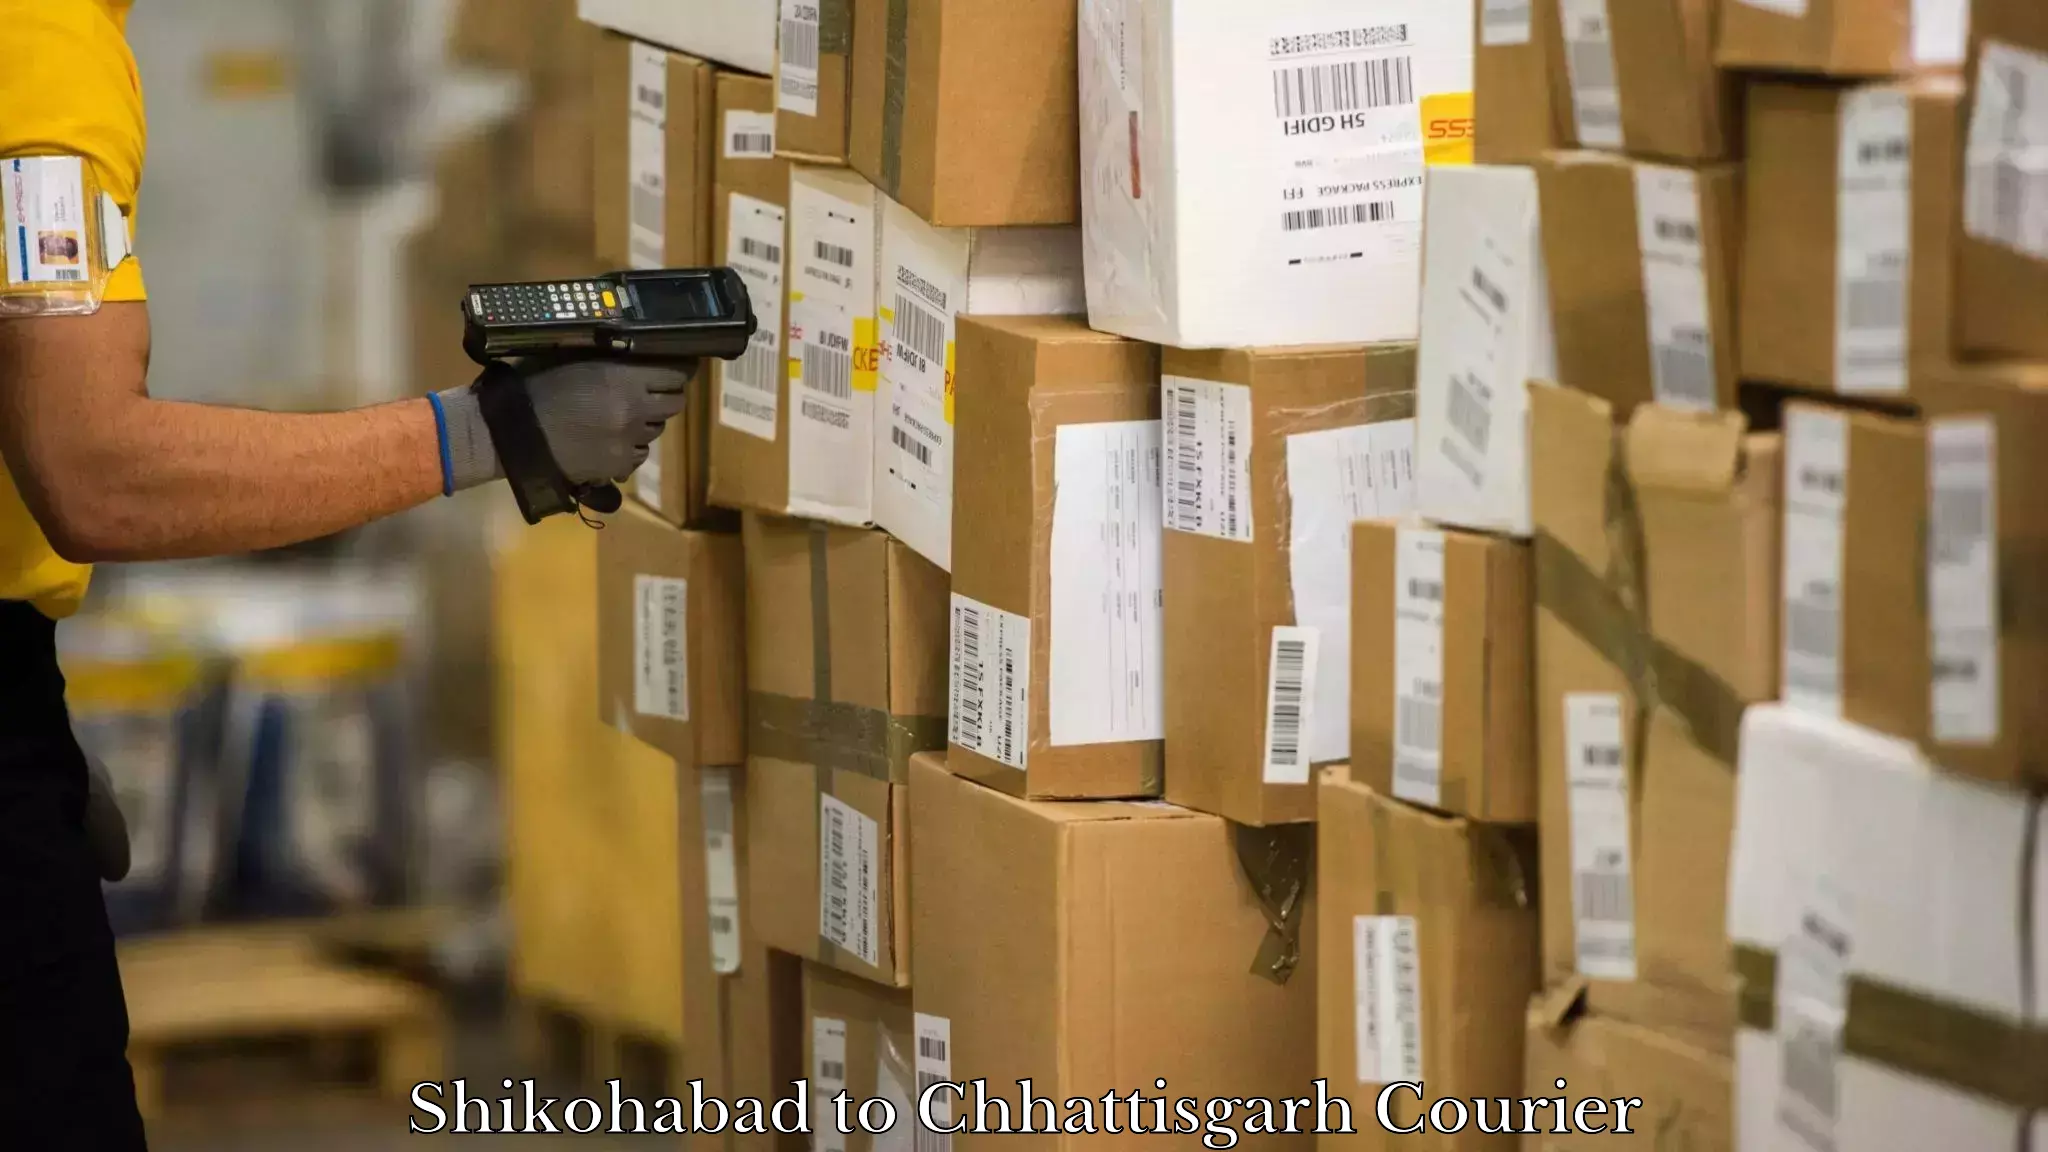 State-of-the-art courier technology Shikohabad to Chhattisgarh